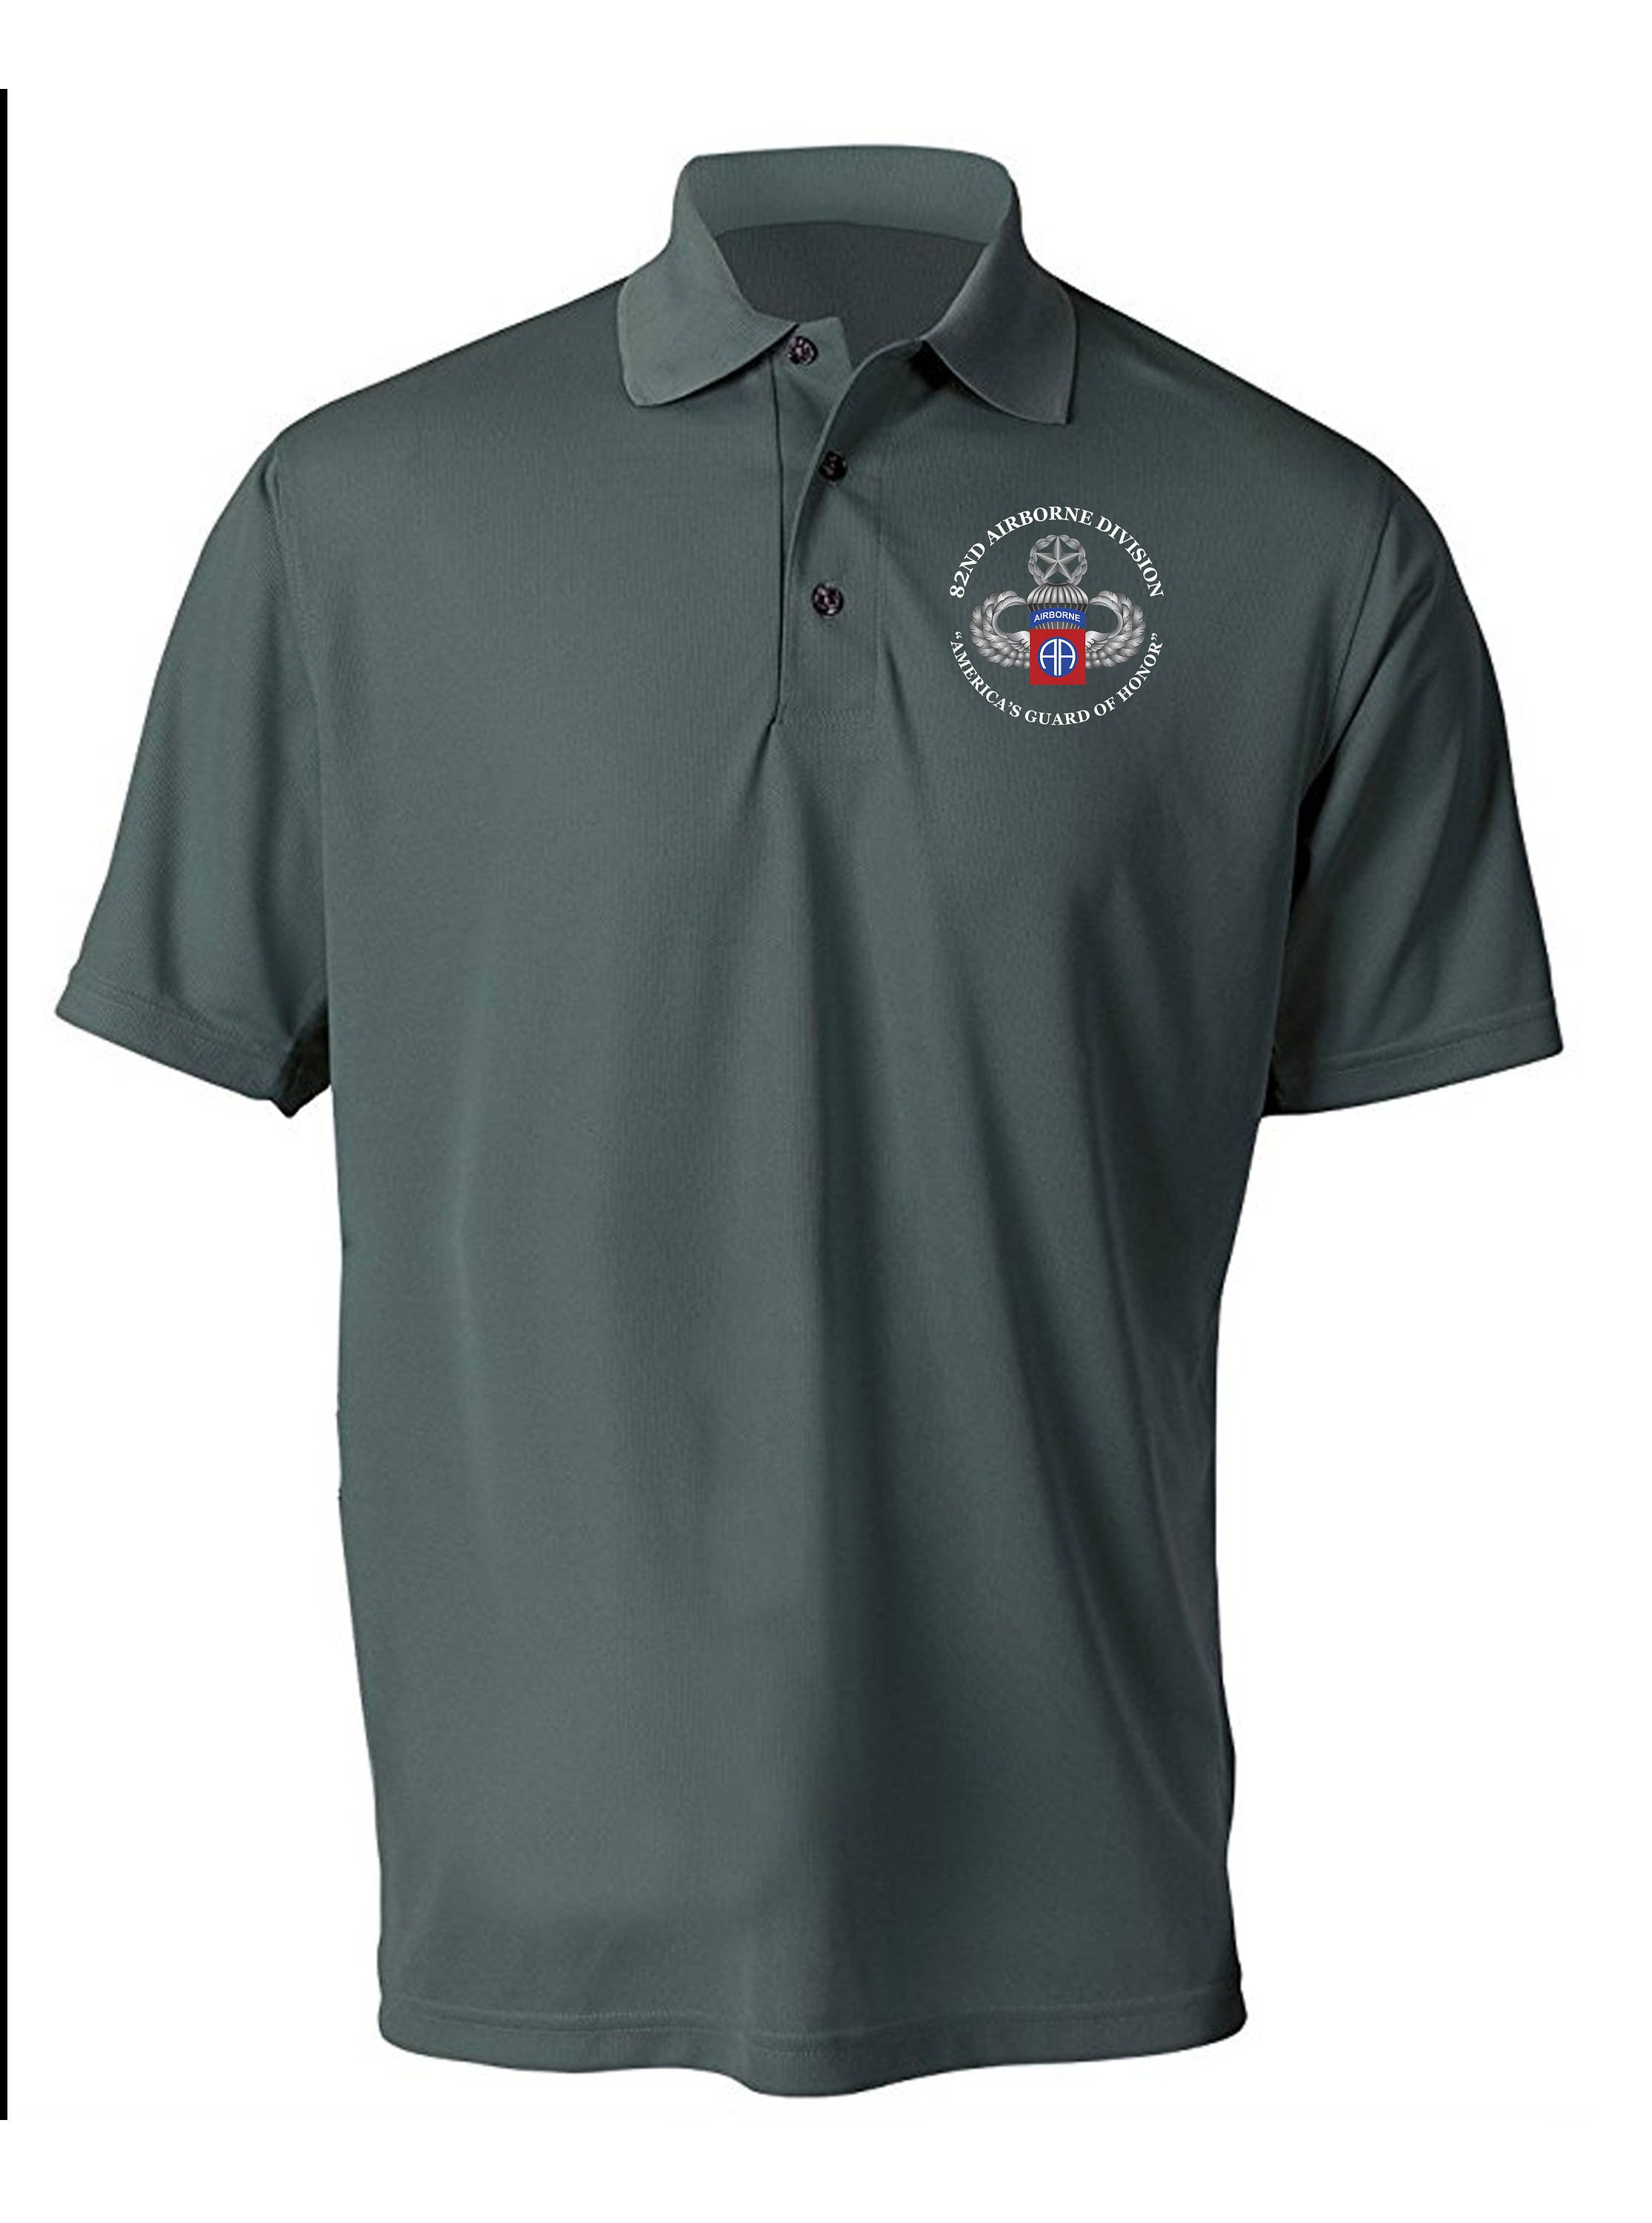 82nd Airborne Division Embroidered Moisture Wick Polo Shirt